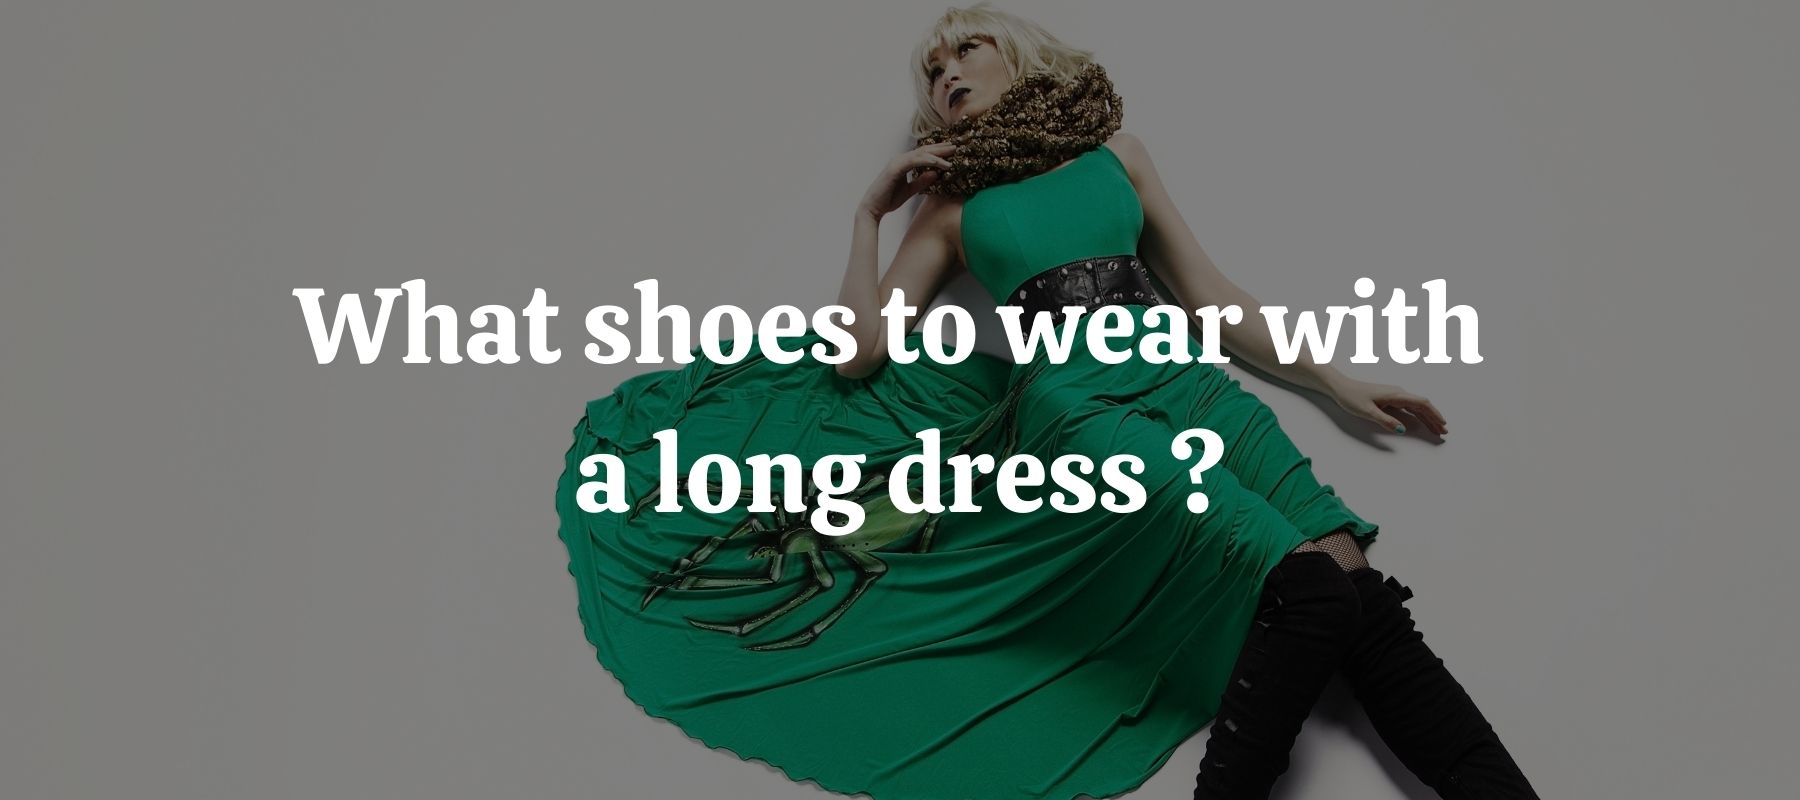 What shoes to wear with a long dress